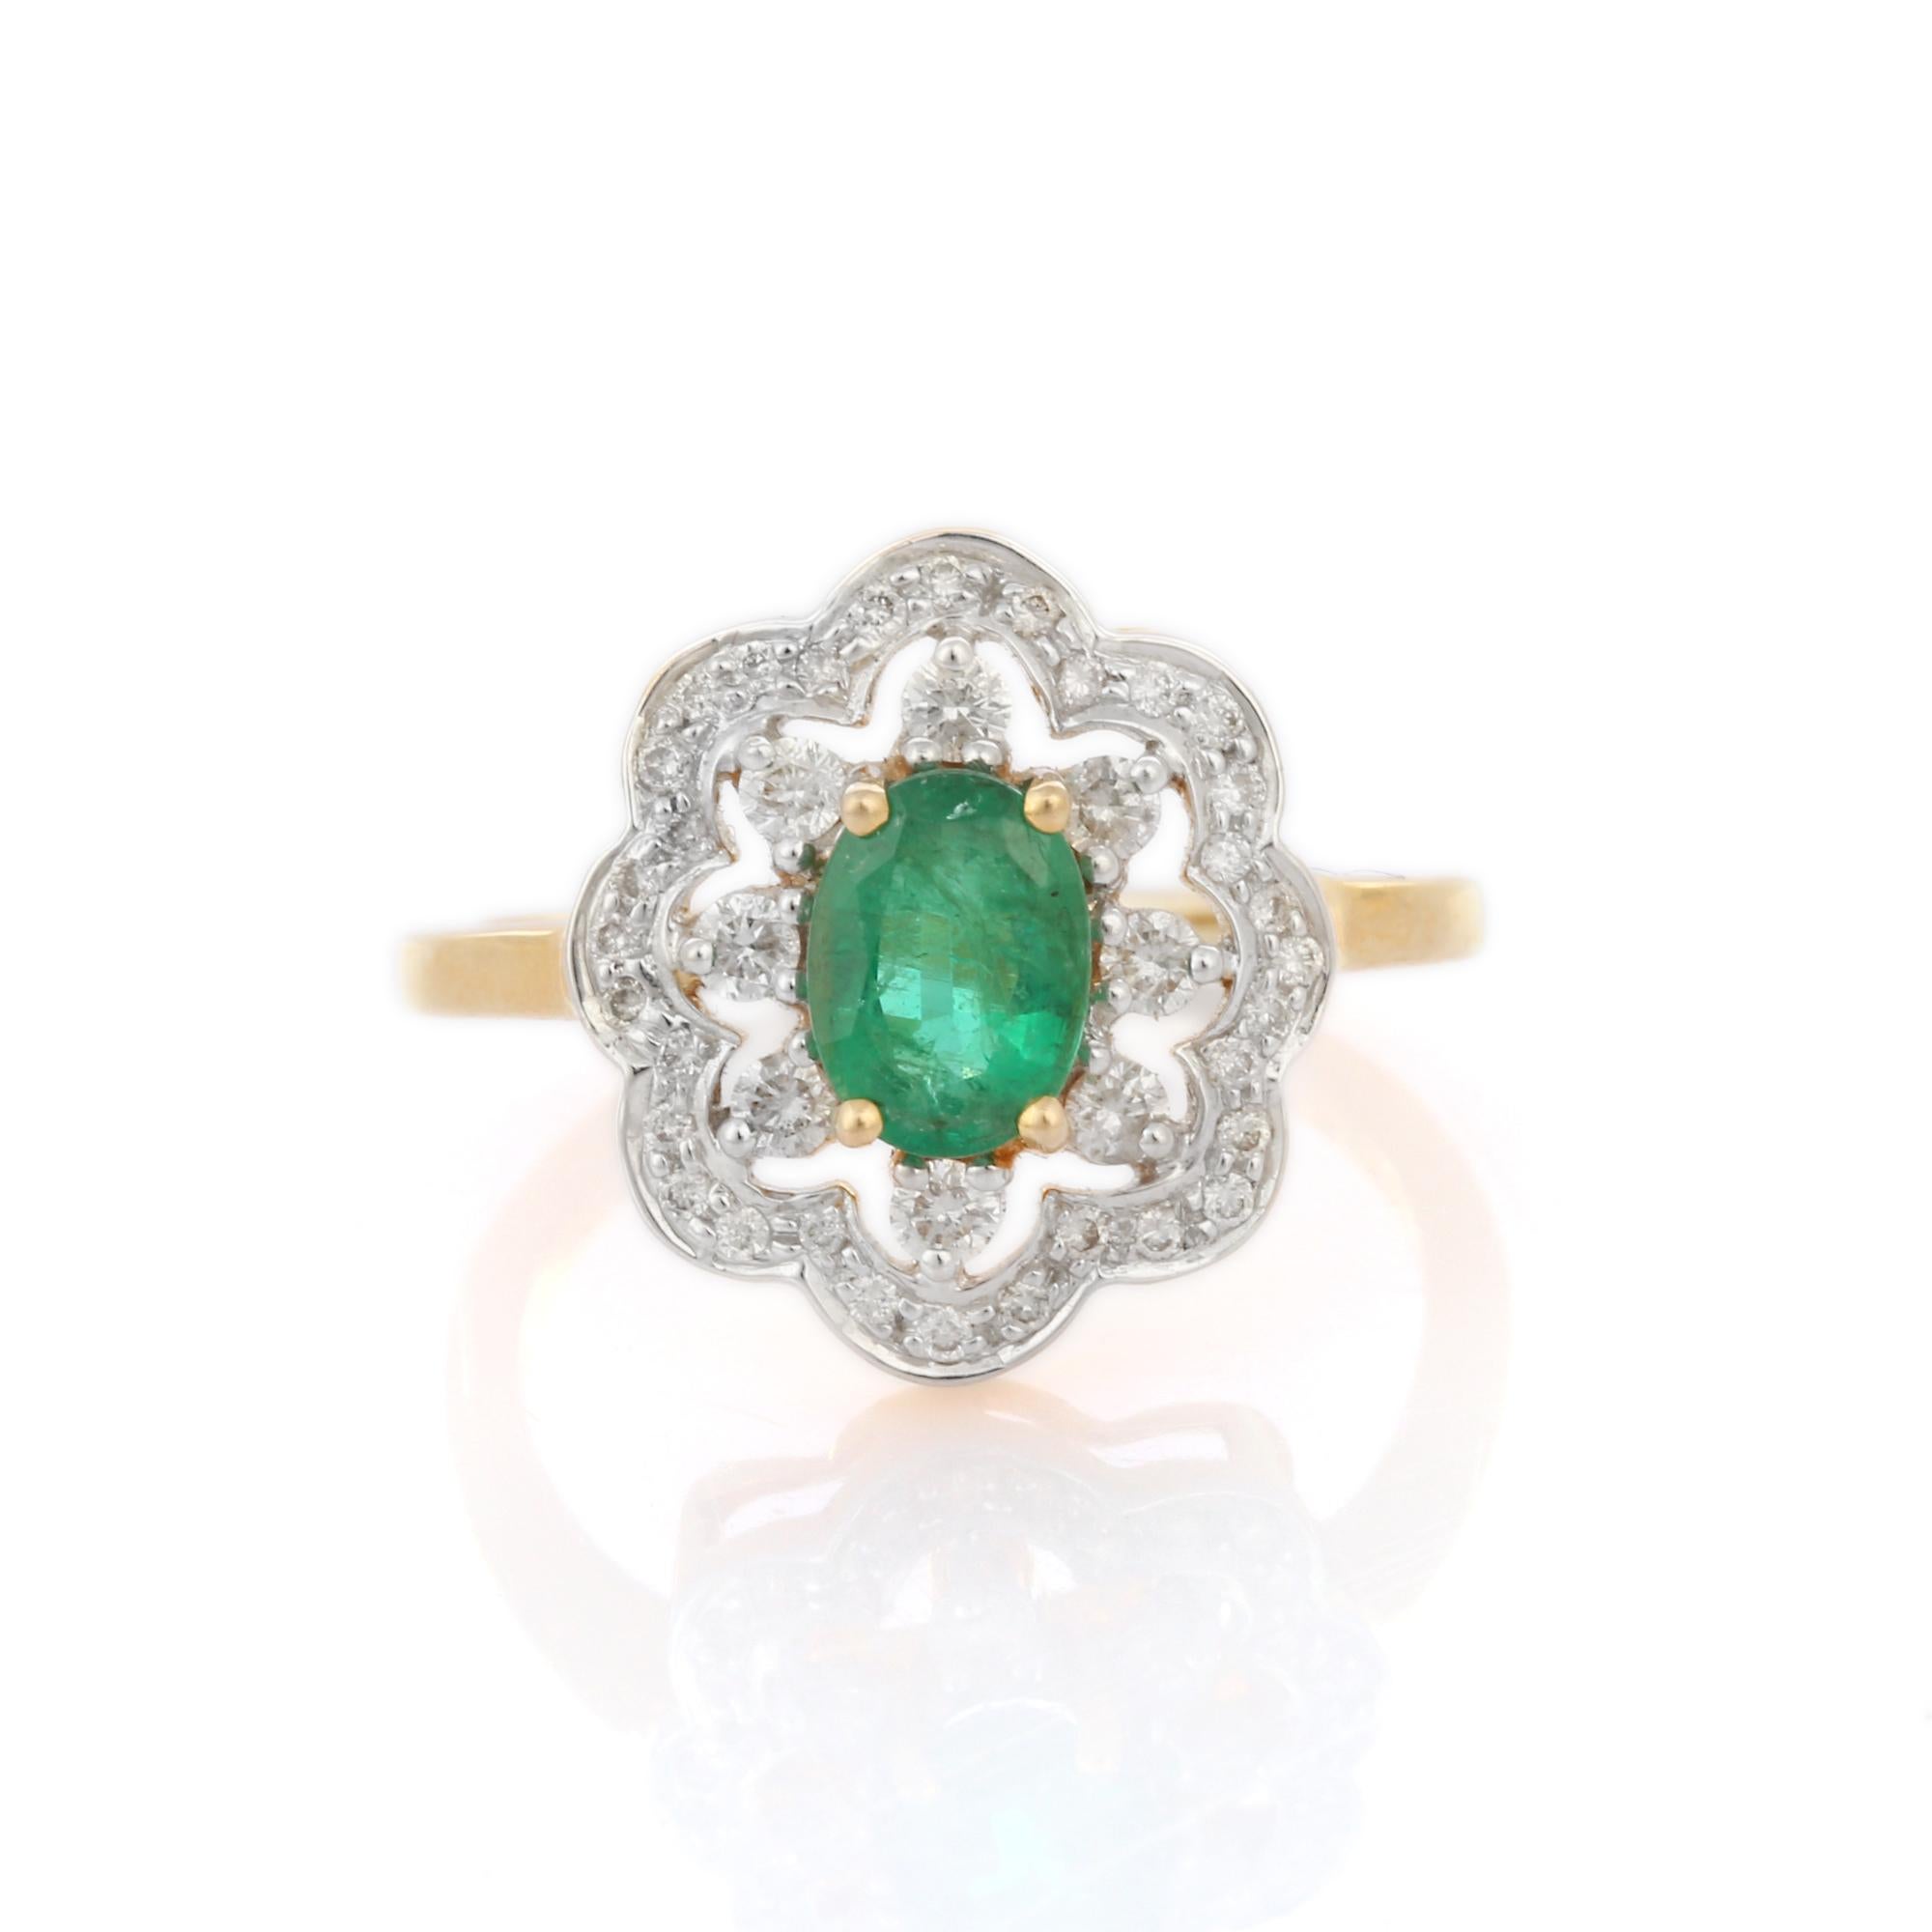 For Sale:  Big Floral Oval Cut Emerald and Diamond Cocktail Ring in 18K Yellow Gold 5